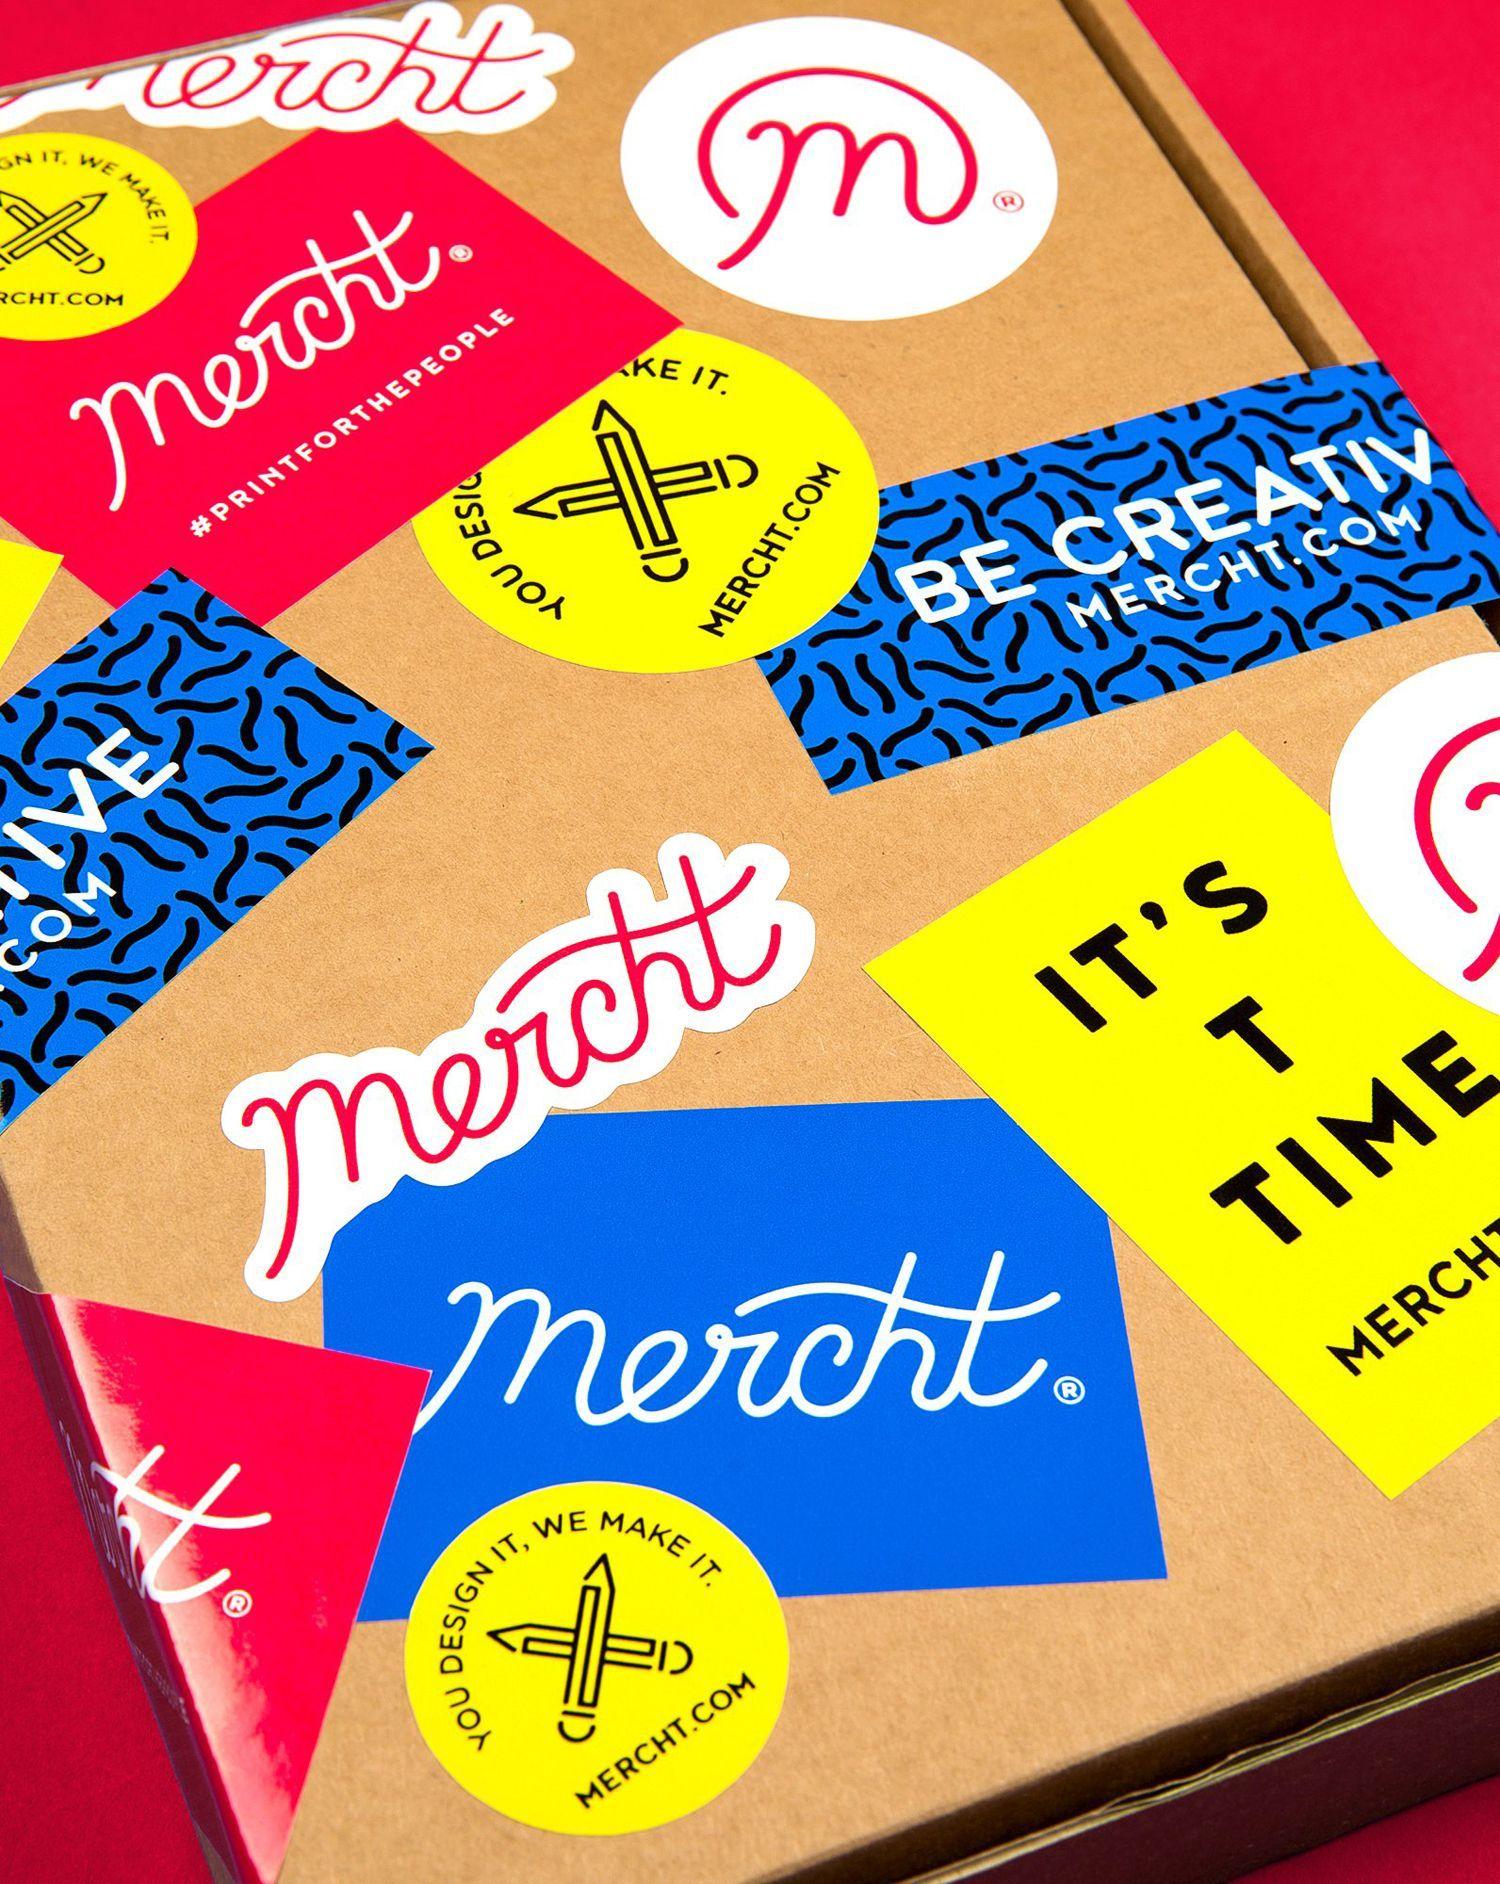 Robot with Yellow Food Logo - New Logo & Brand Identity for Mercht by Robot Food — BP&O | BP&O ...